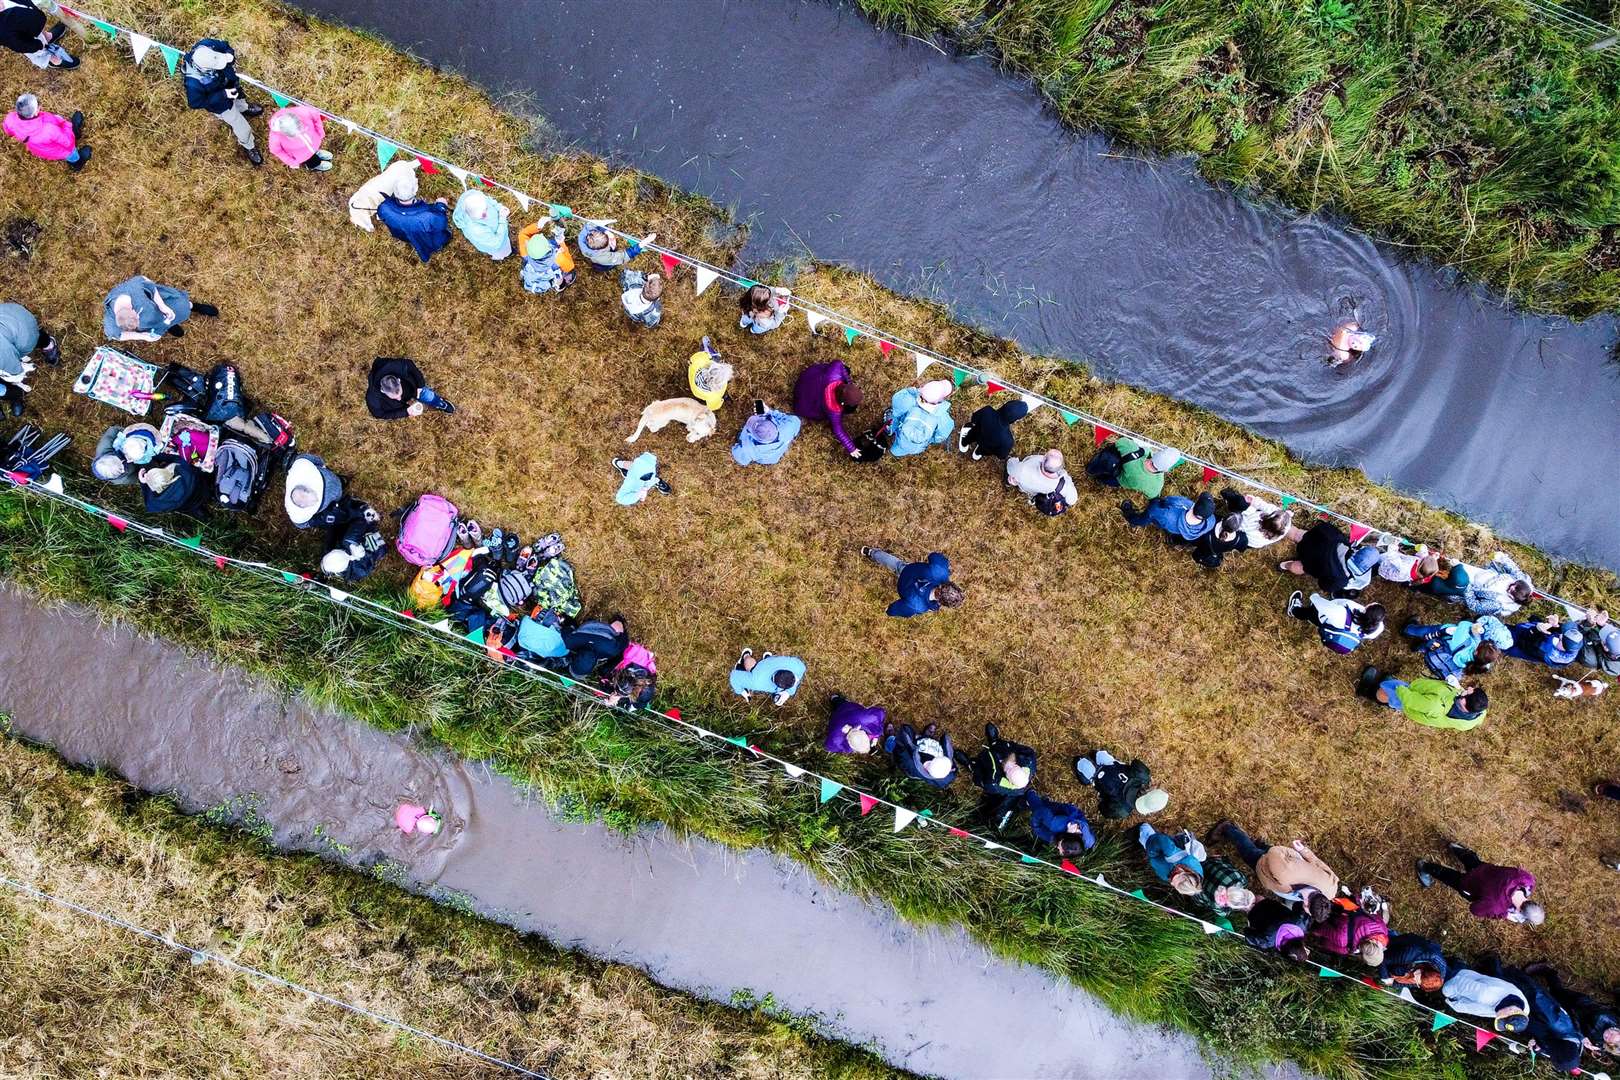 Spectators lined the banks of the bog (Ben Birchall/PA)